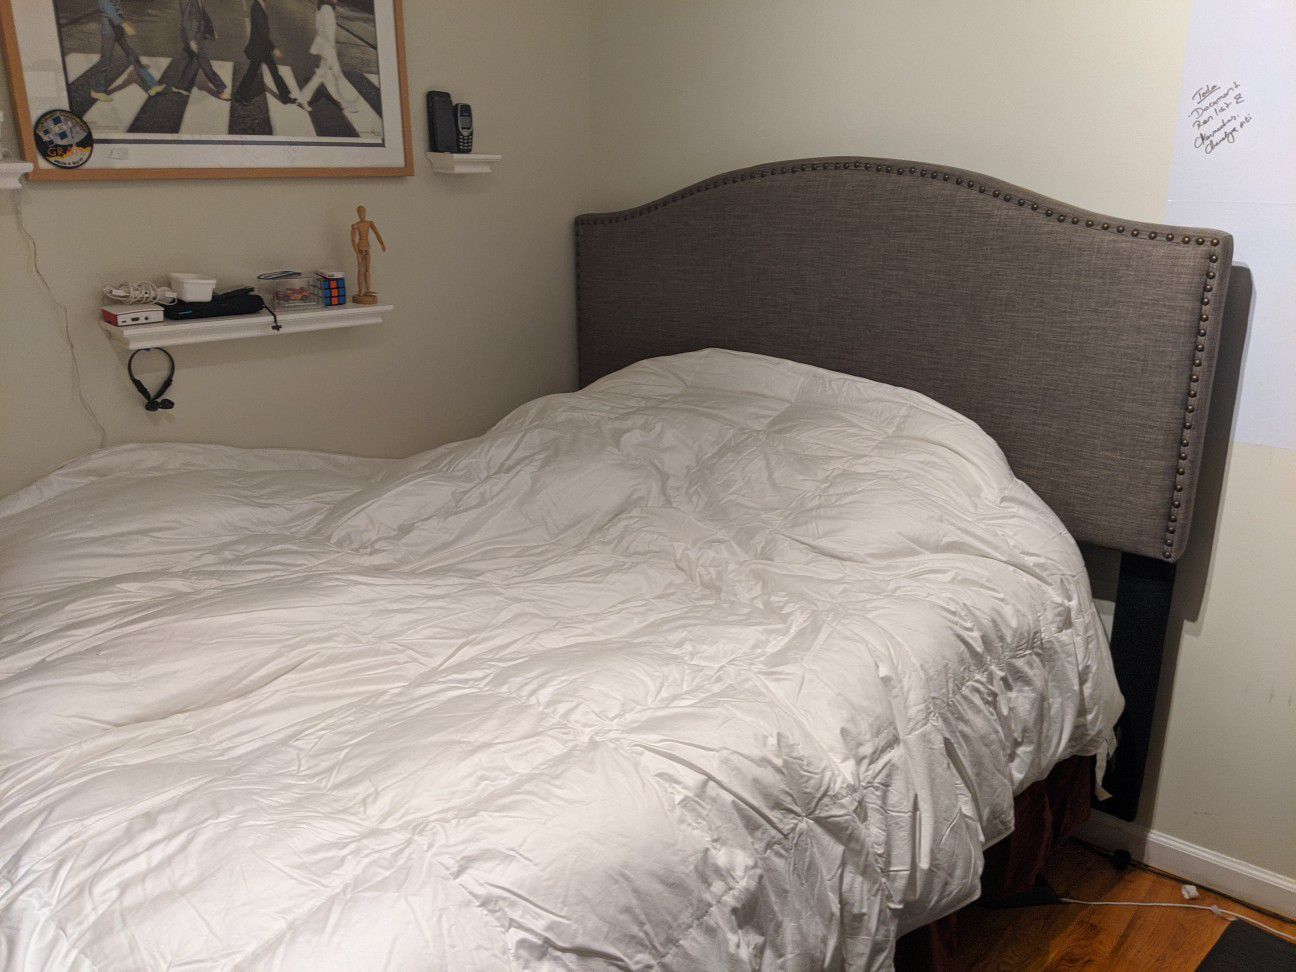 Full-sized bed frame, mattress, box spring, and headboard